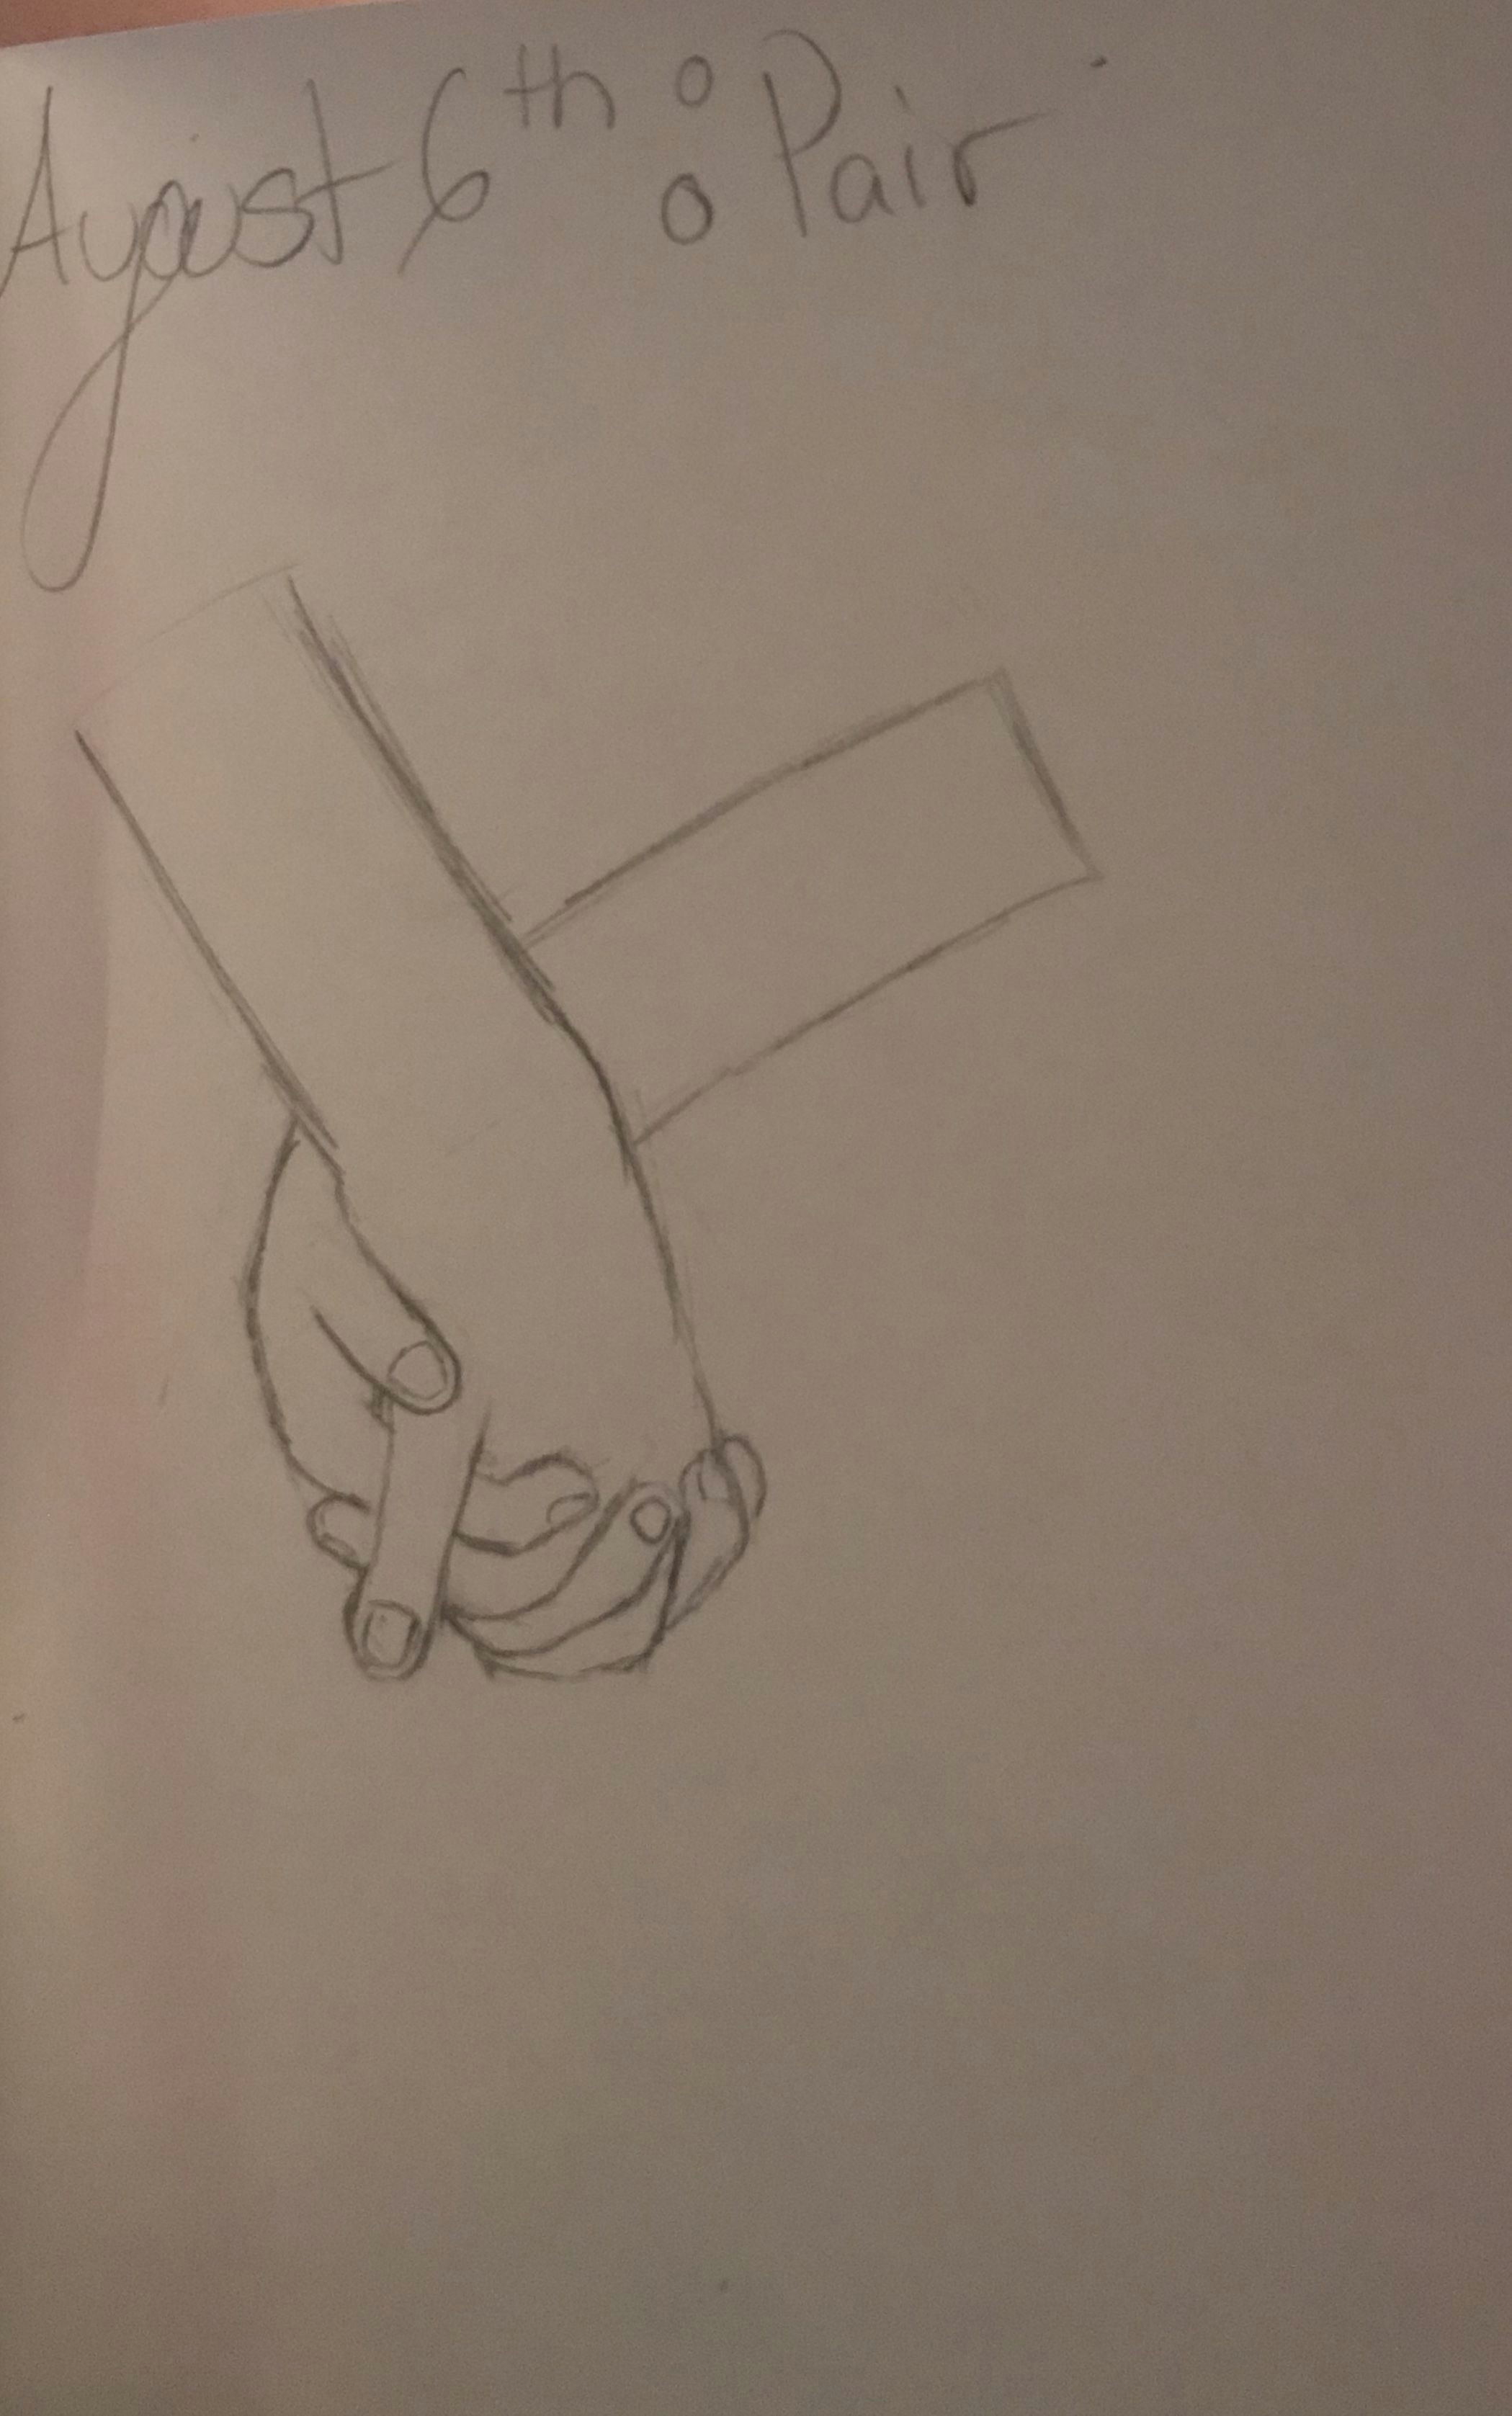 august drawing challenge august 6th pair this is actually my favorite one so far hands are hard but they turned out really well